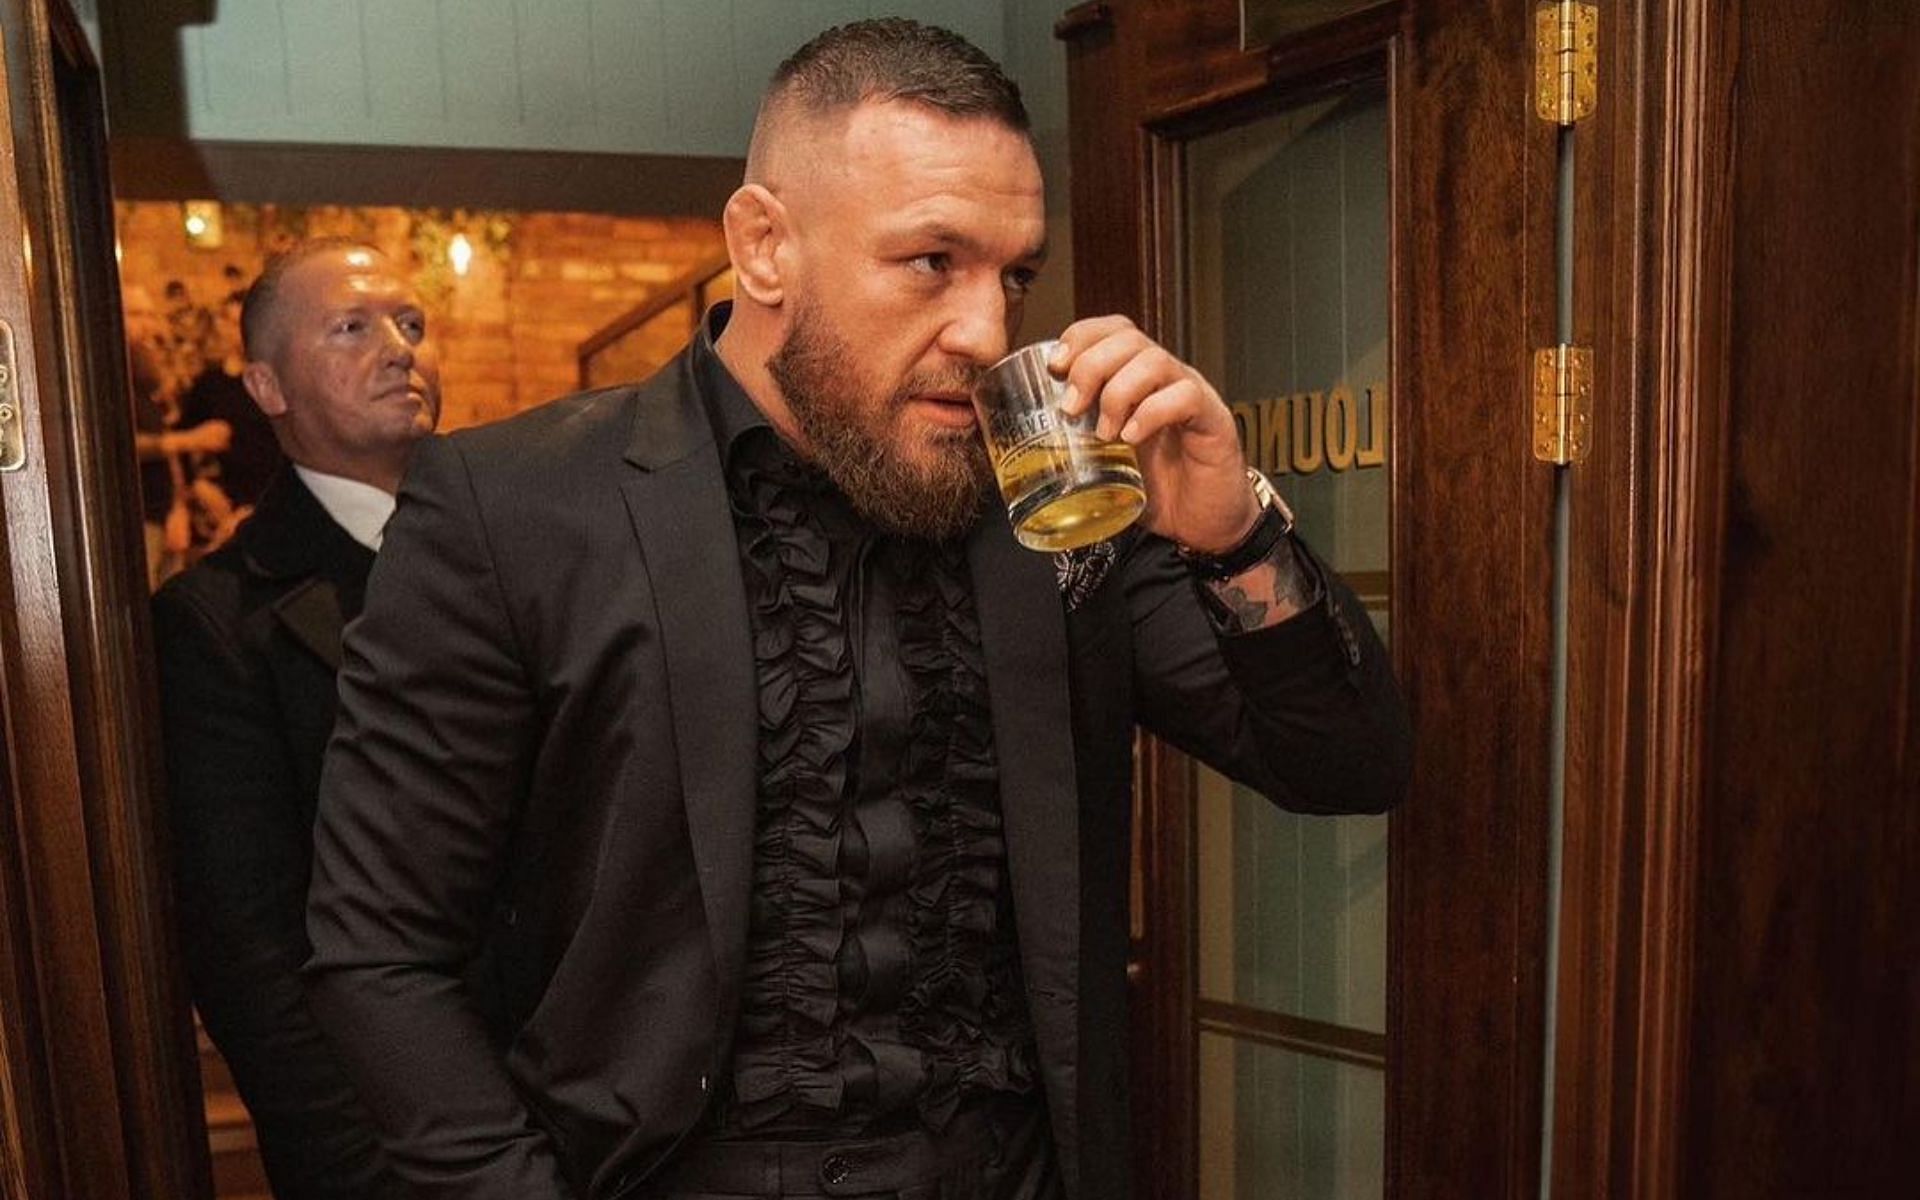 Conor McGregor admits he lost interest in training and began drinking as his UFC comeback is delayed